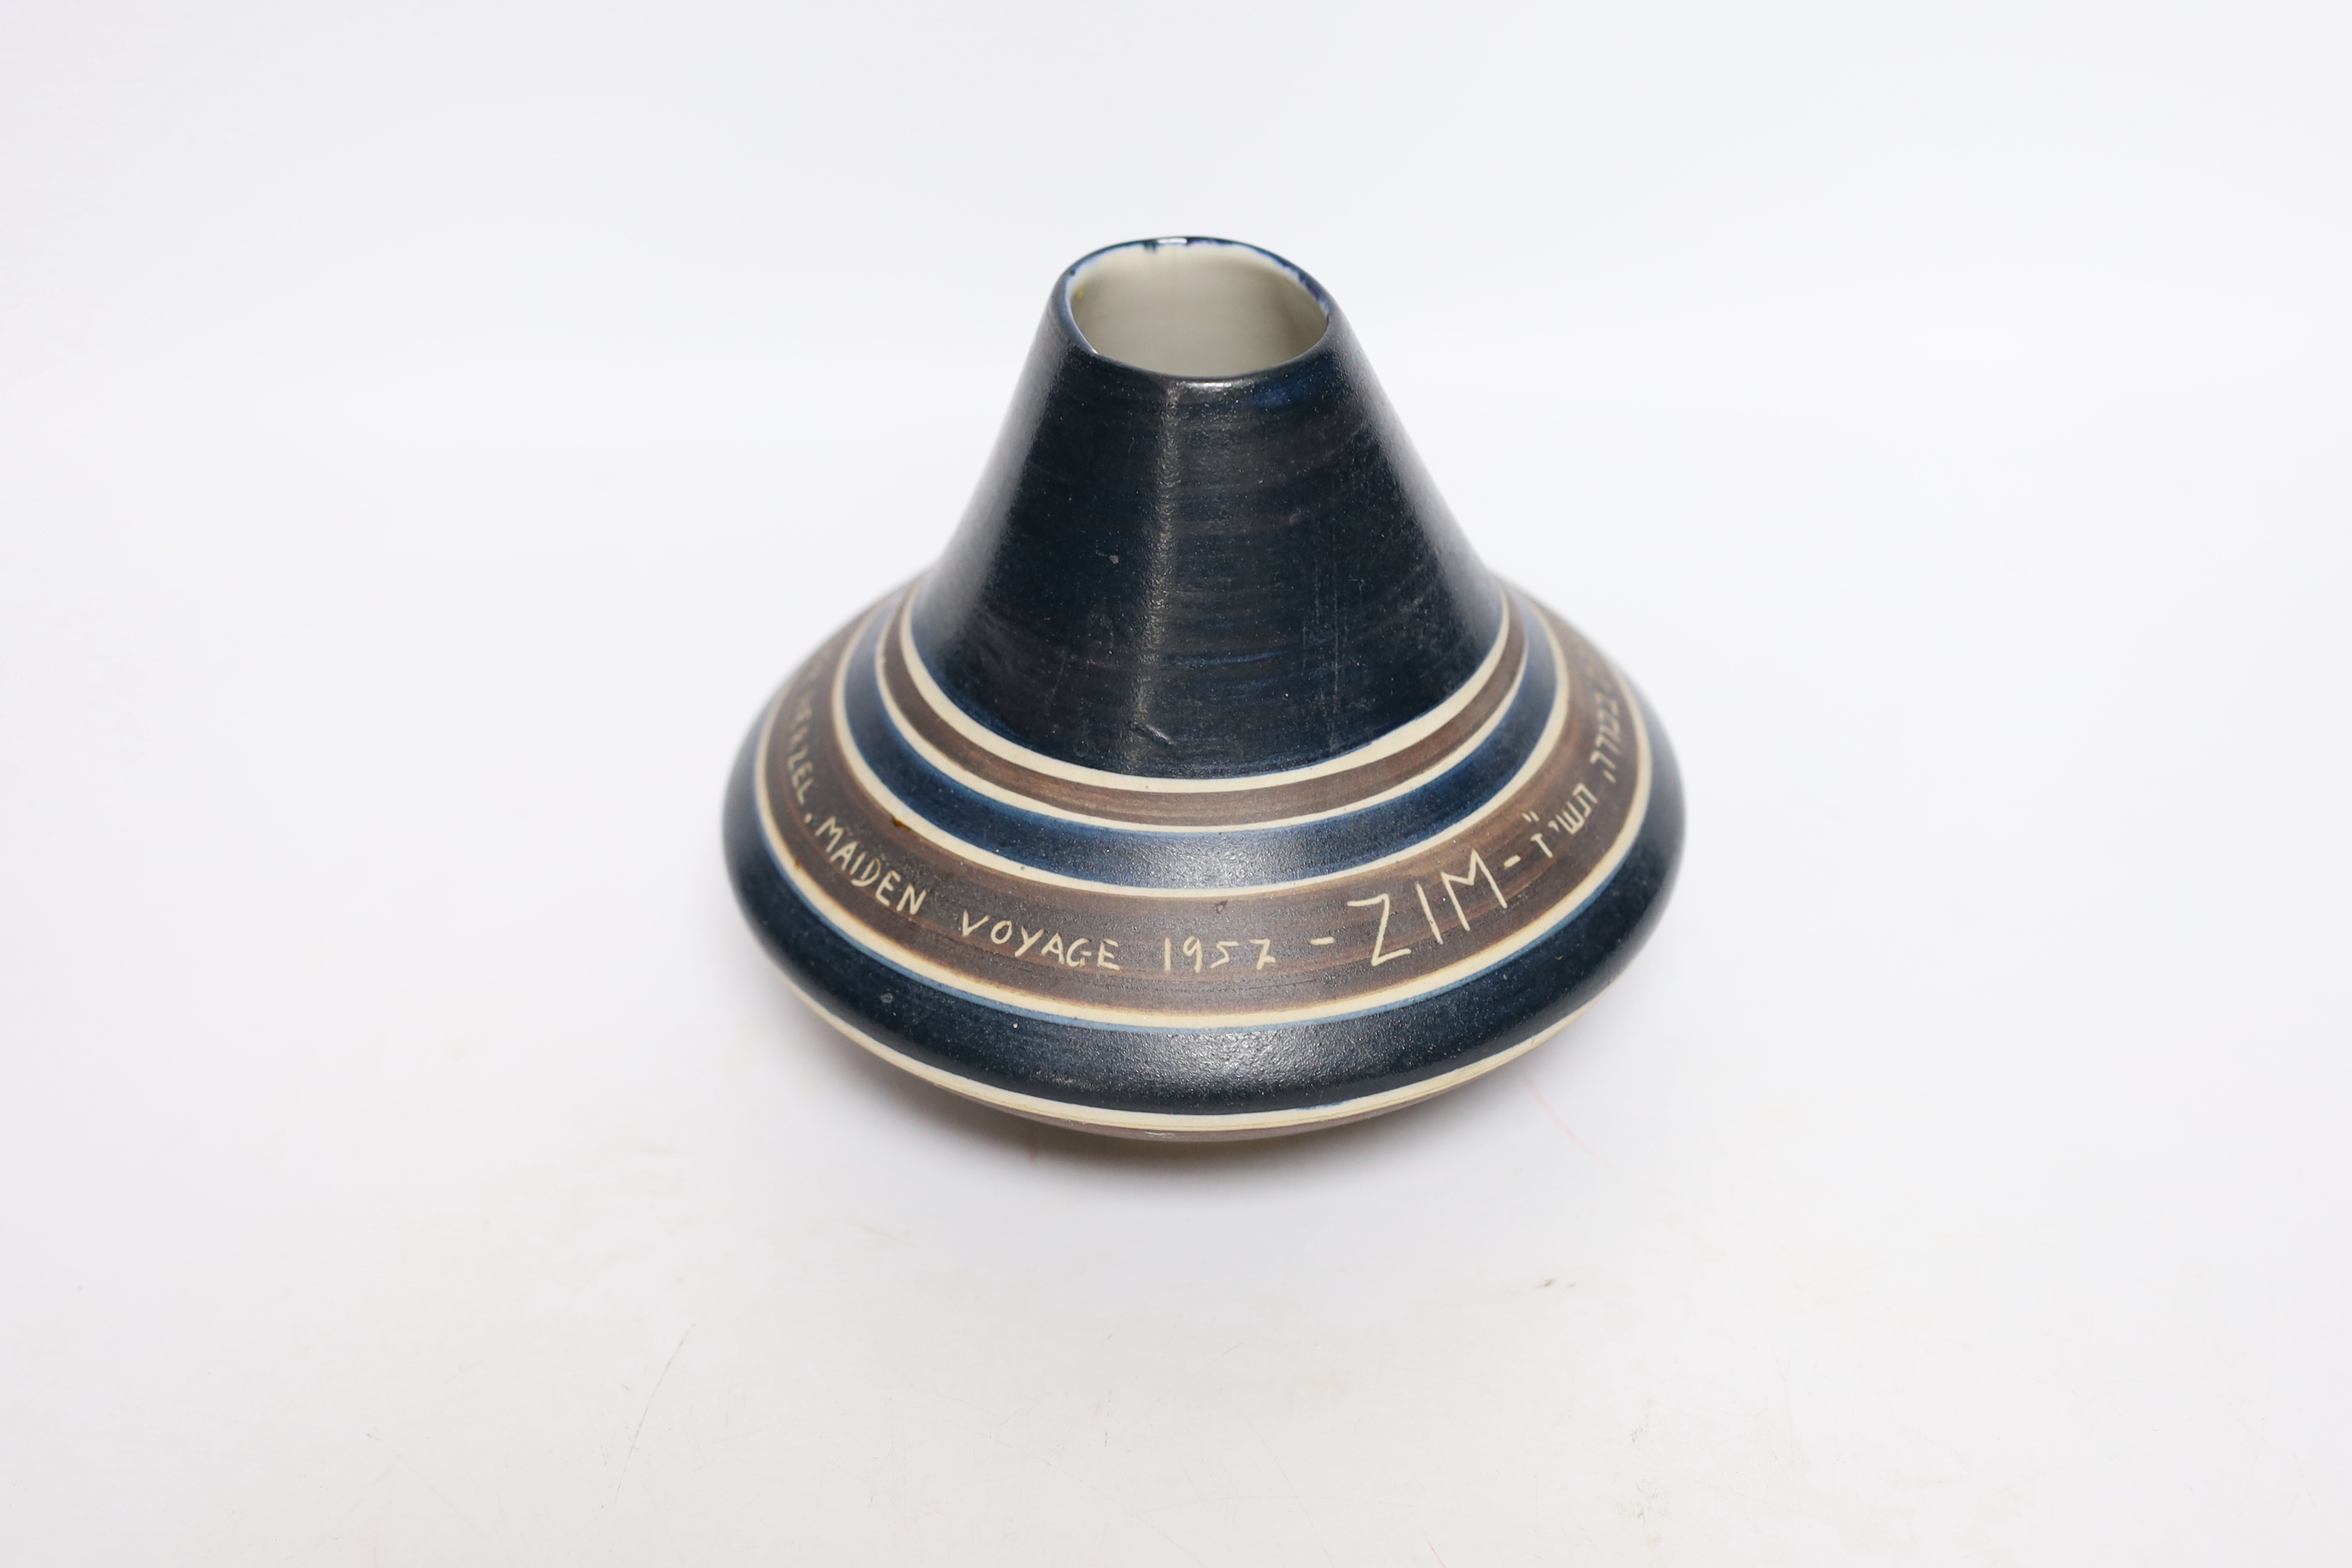 A 20th century Israeli commemorative vase, inscribed SS The Odor Herzel, maiden voyage 1957, incised to the base